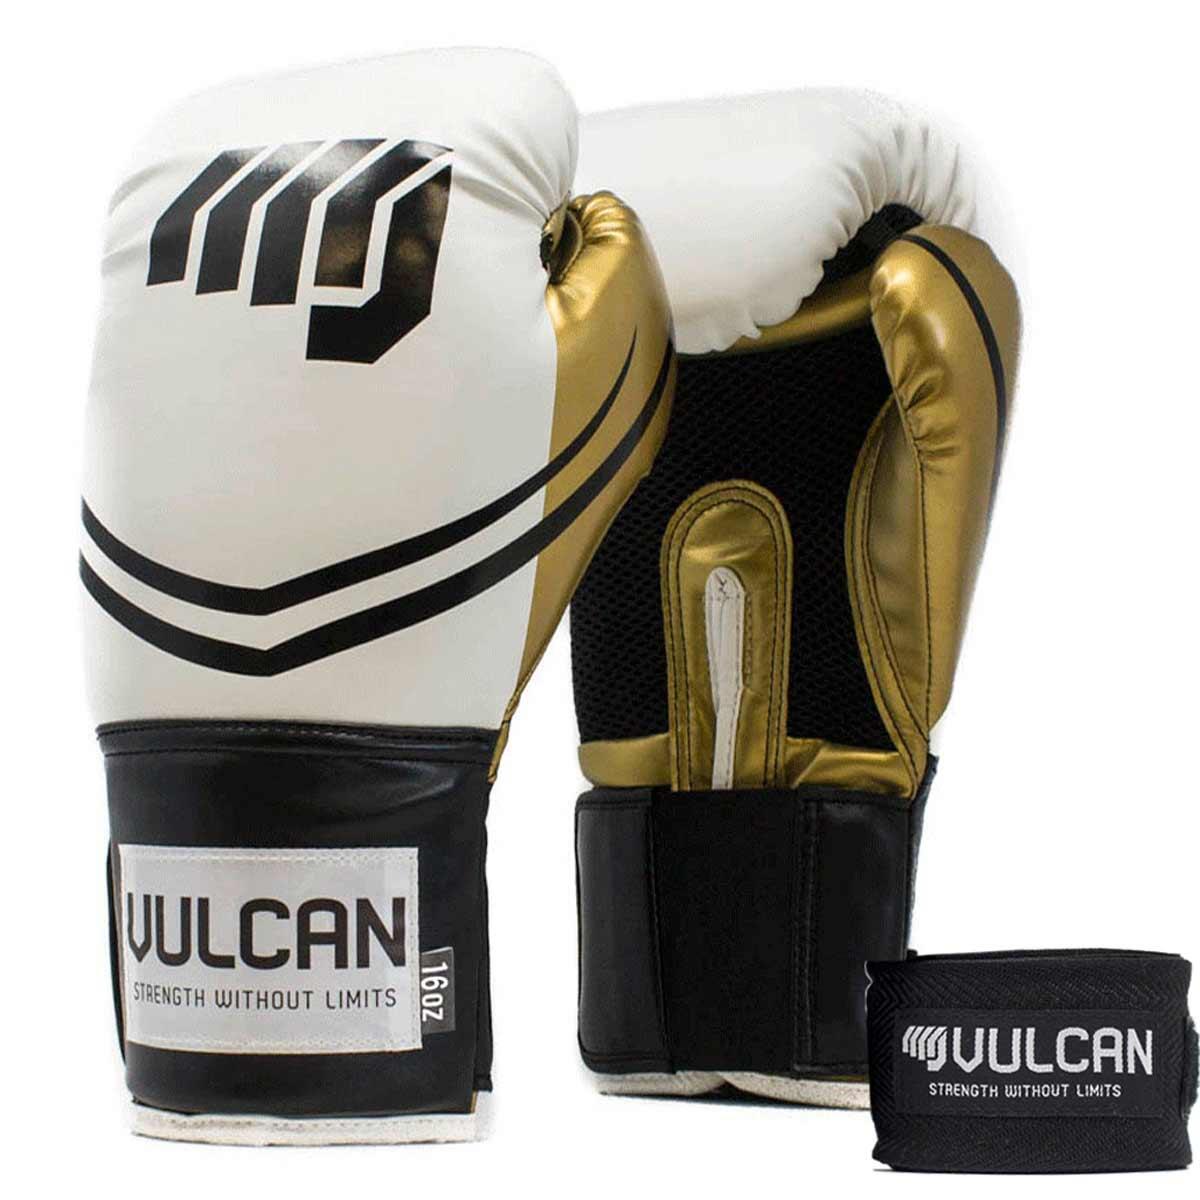 VULCAN BOXING GLOVES 14oz WHITE/GOLD WITH HANDWRAPS 1/7